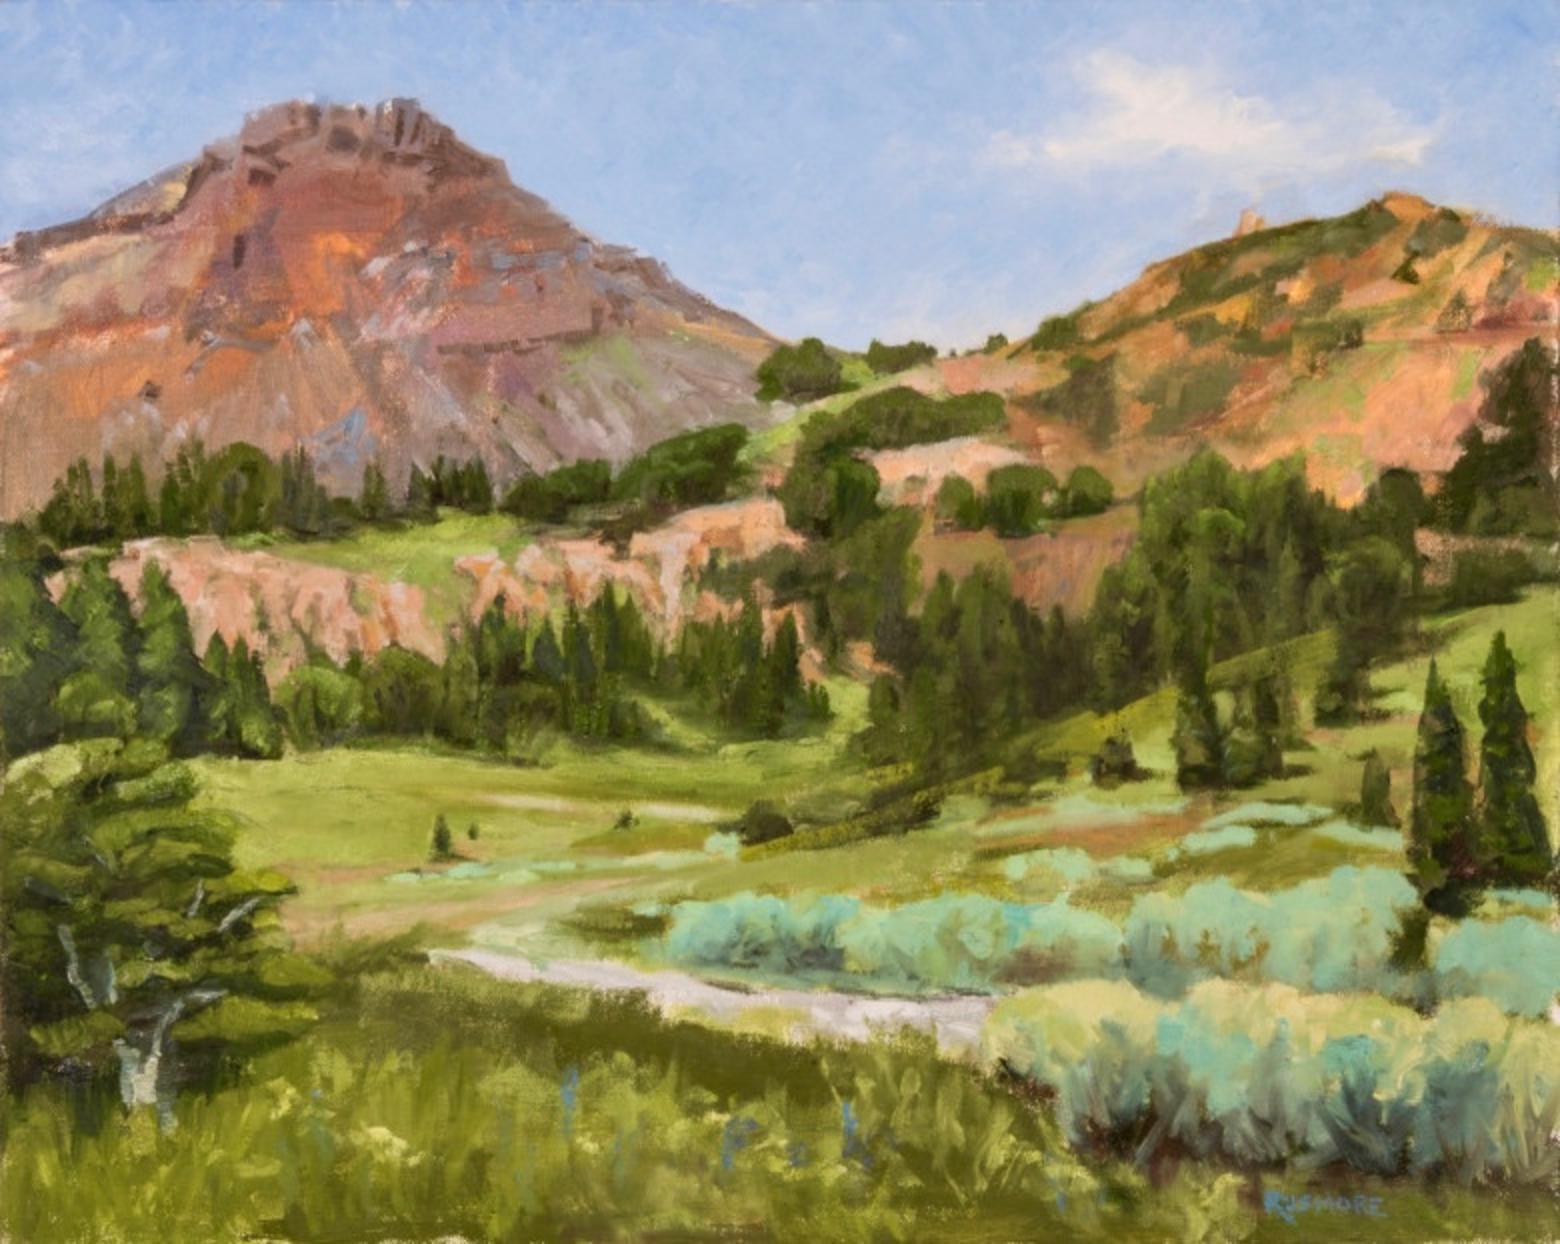 "Crown Butte," a landscape painting by Barbara Rusmore. Anyone who visits the vicinity around Crown Butte, Henderson Mountain and the drainage where the New World Mine would have been constructed might not be aware of the toxic legacy of historic mining or the threat of new mining that loomed large. Not only was a mine fought off, but reclamation has resulted in re-wilding near Yellowstone and the Absaroka-Beartooth-Beartooth Wilderness. 